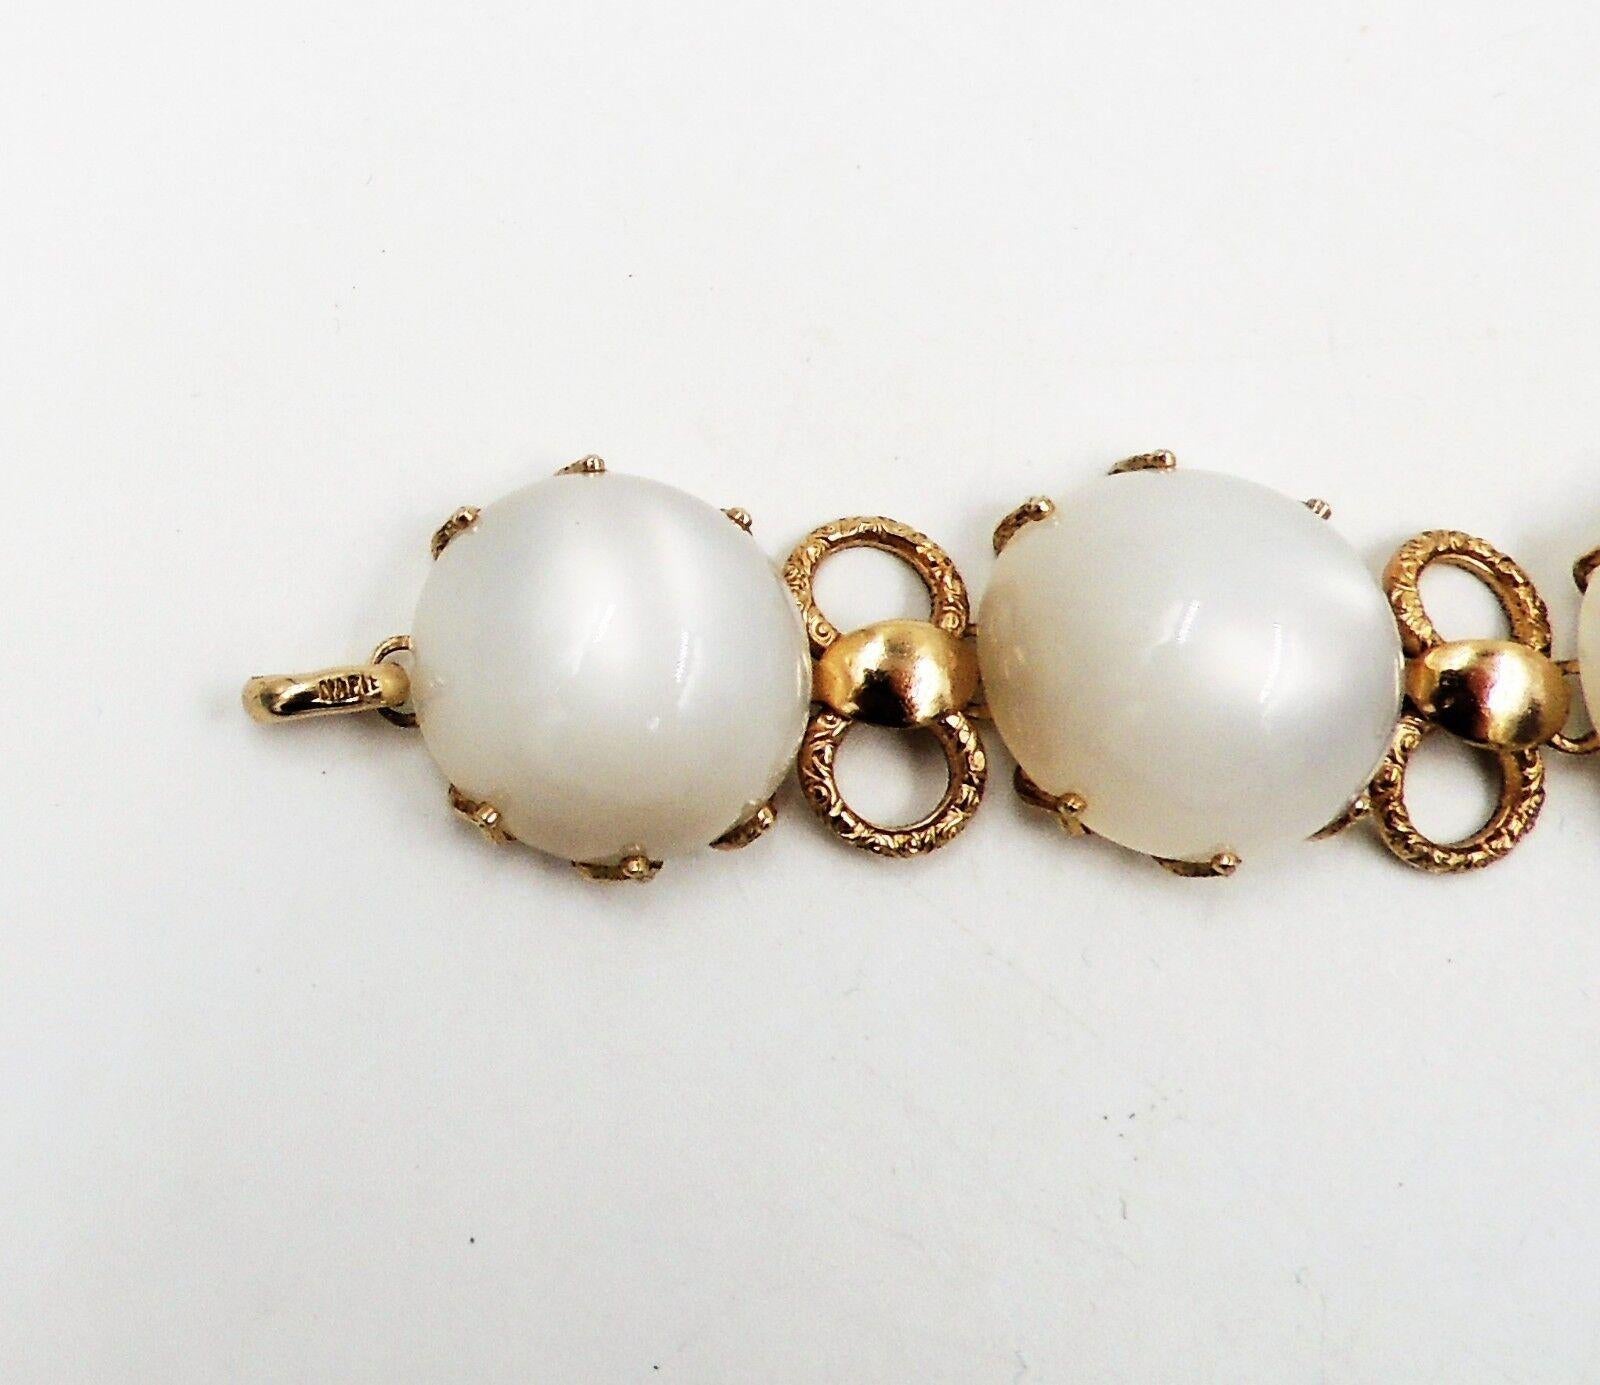 1950s goldtone cabochon faux-moonstone rhinestone bracelet with spring ring clasp. Marked 